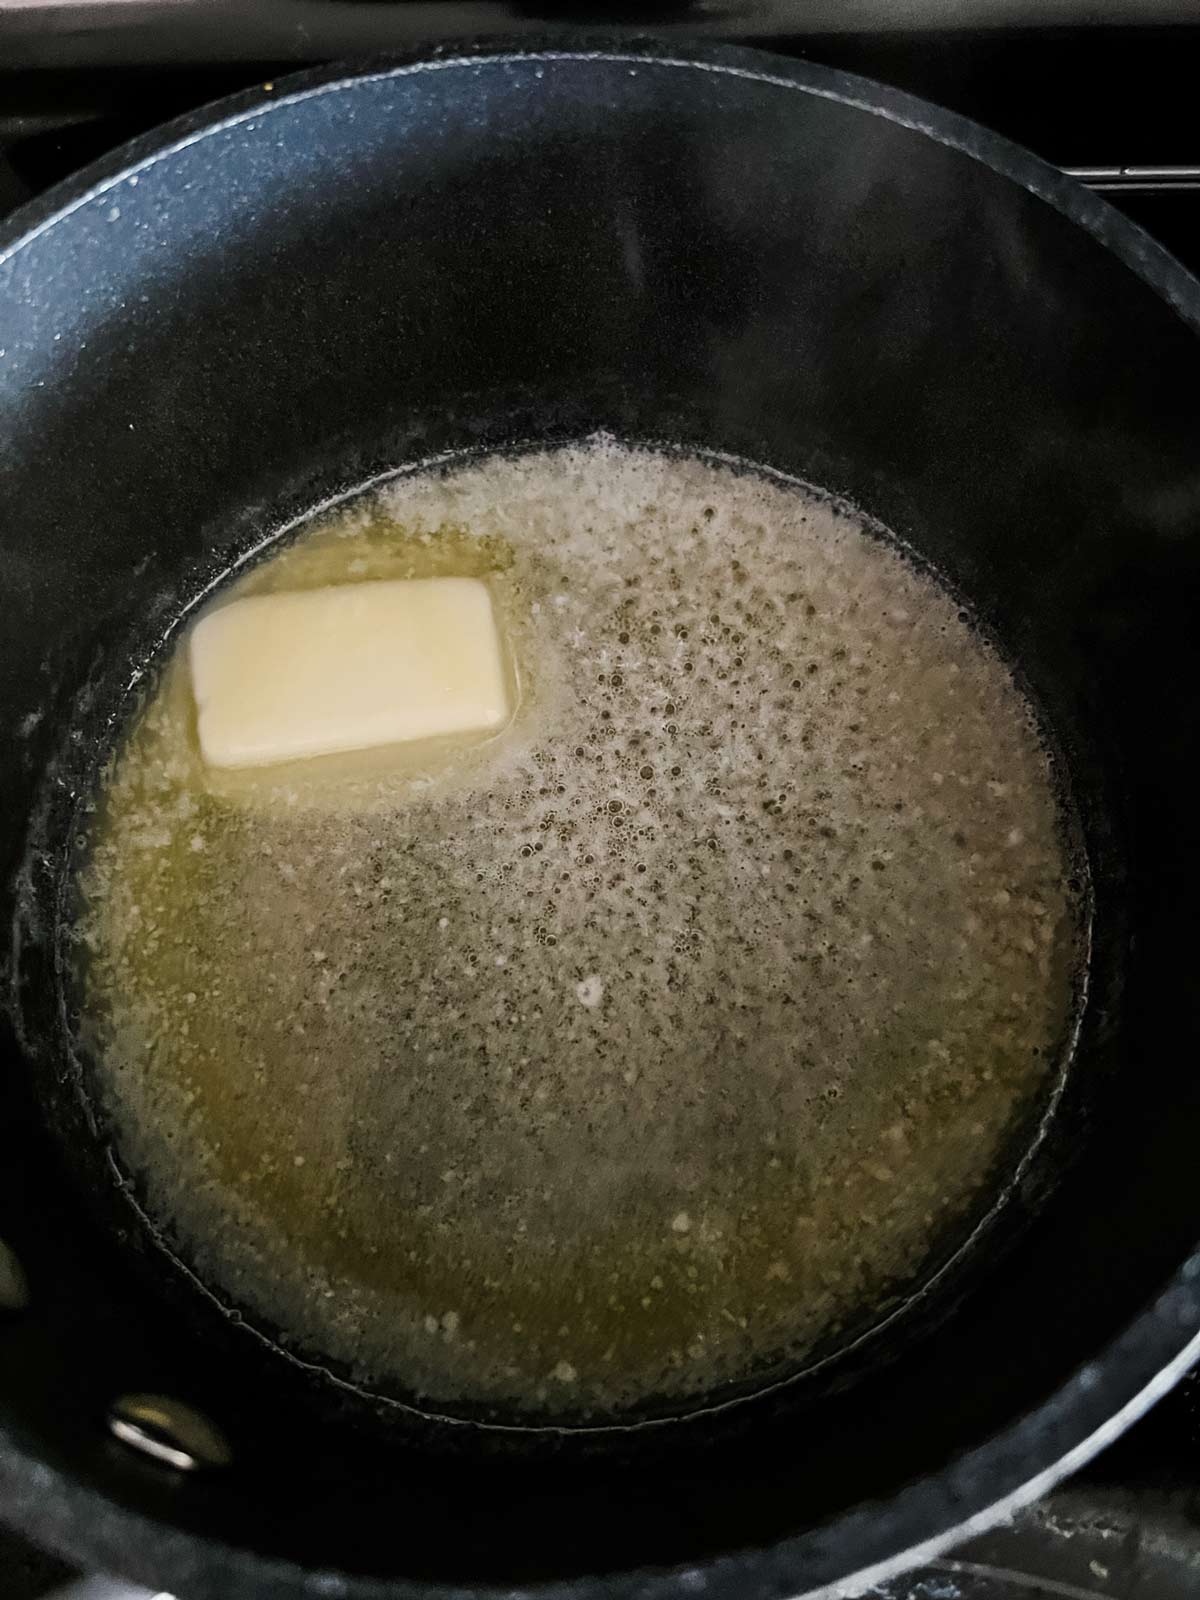 Butter melting in a small saucepan.